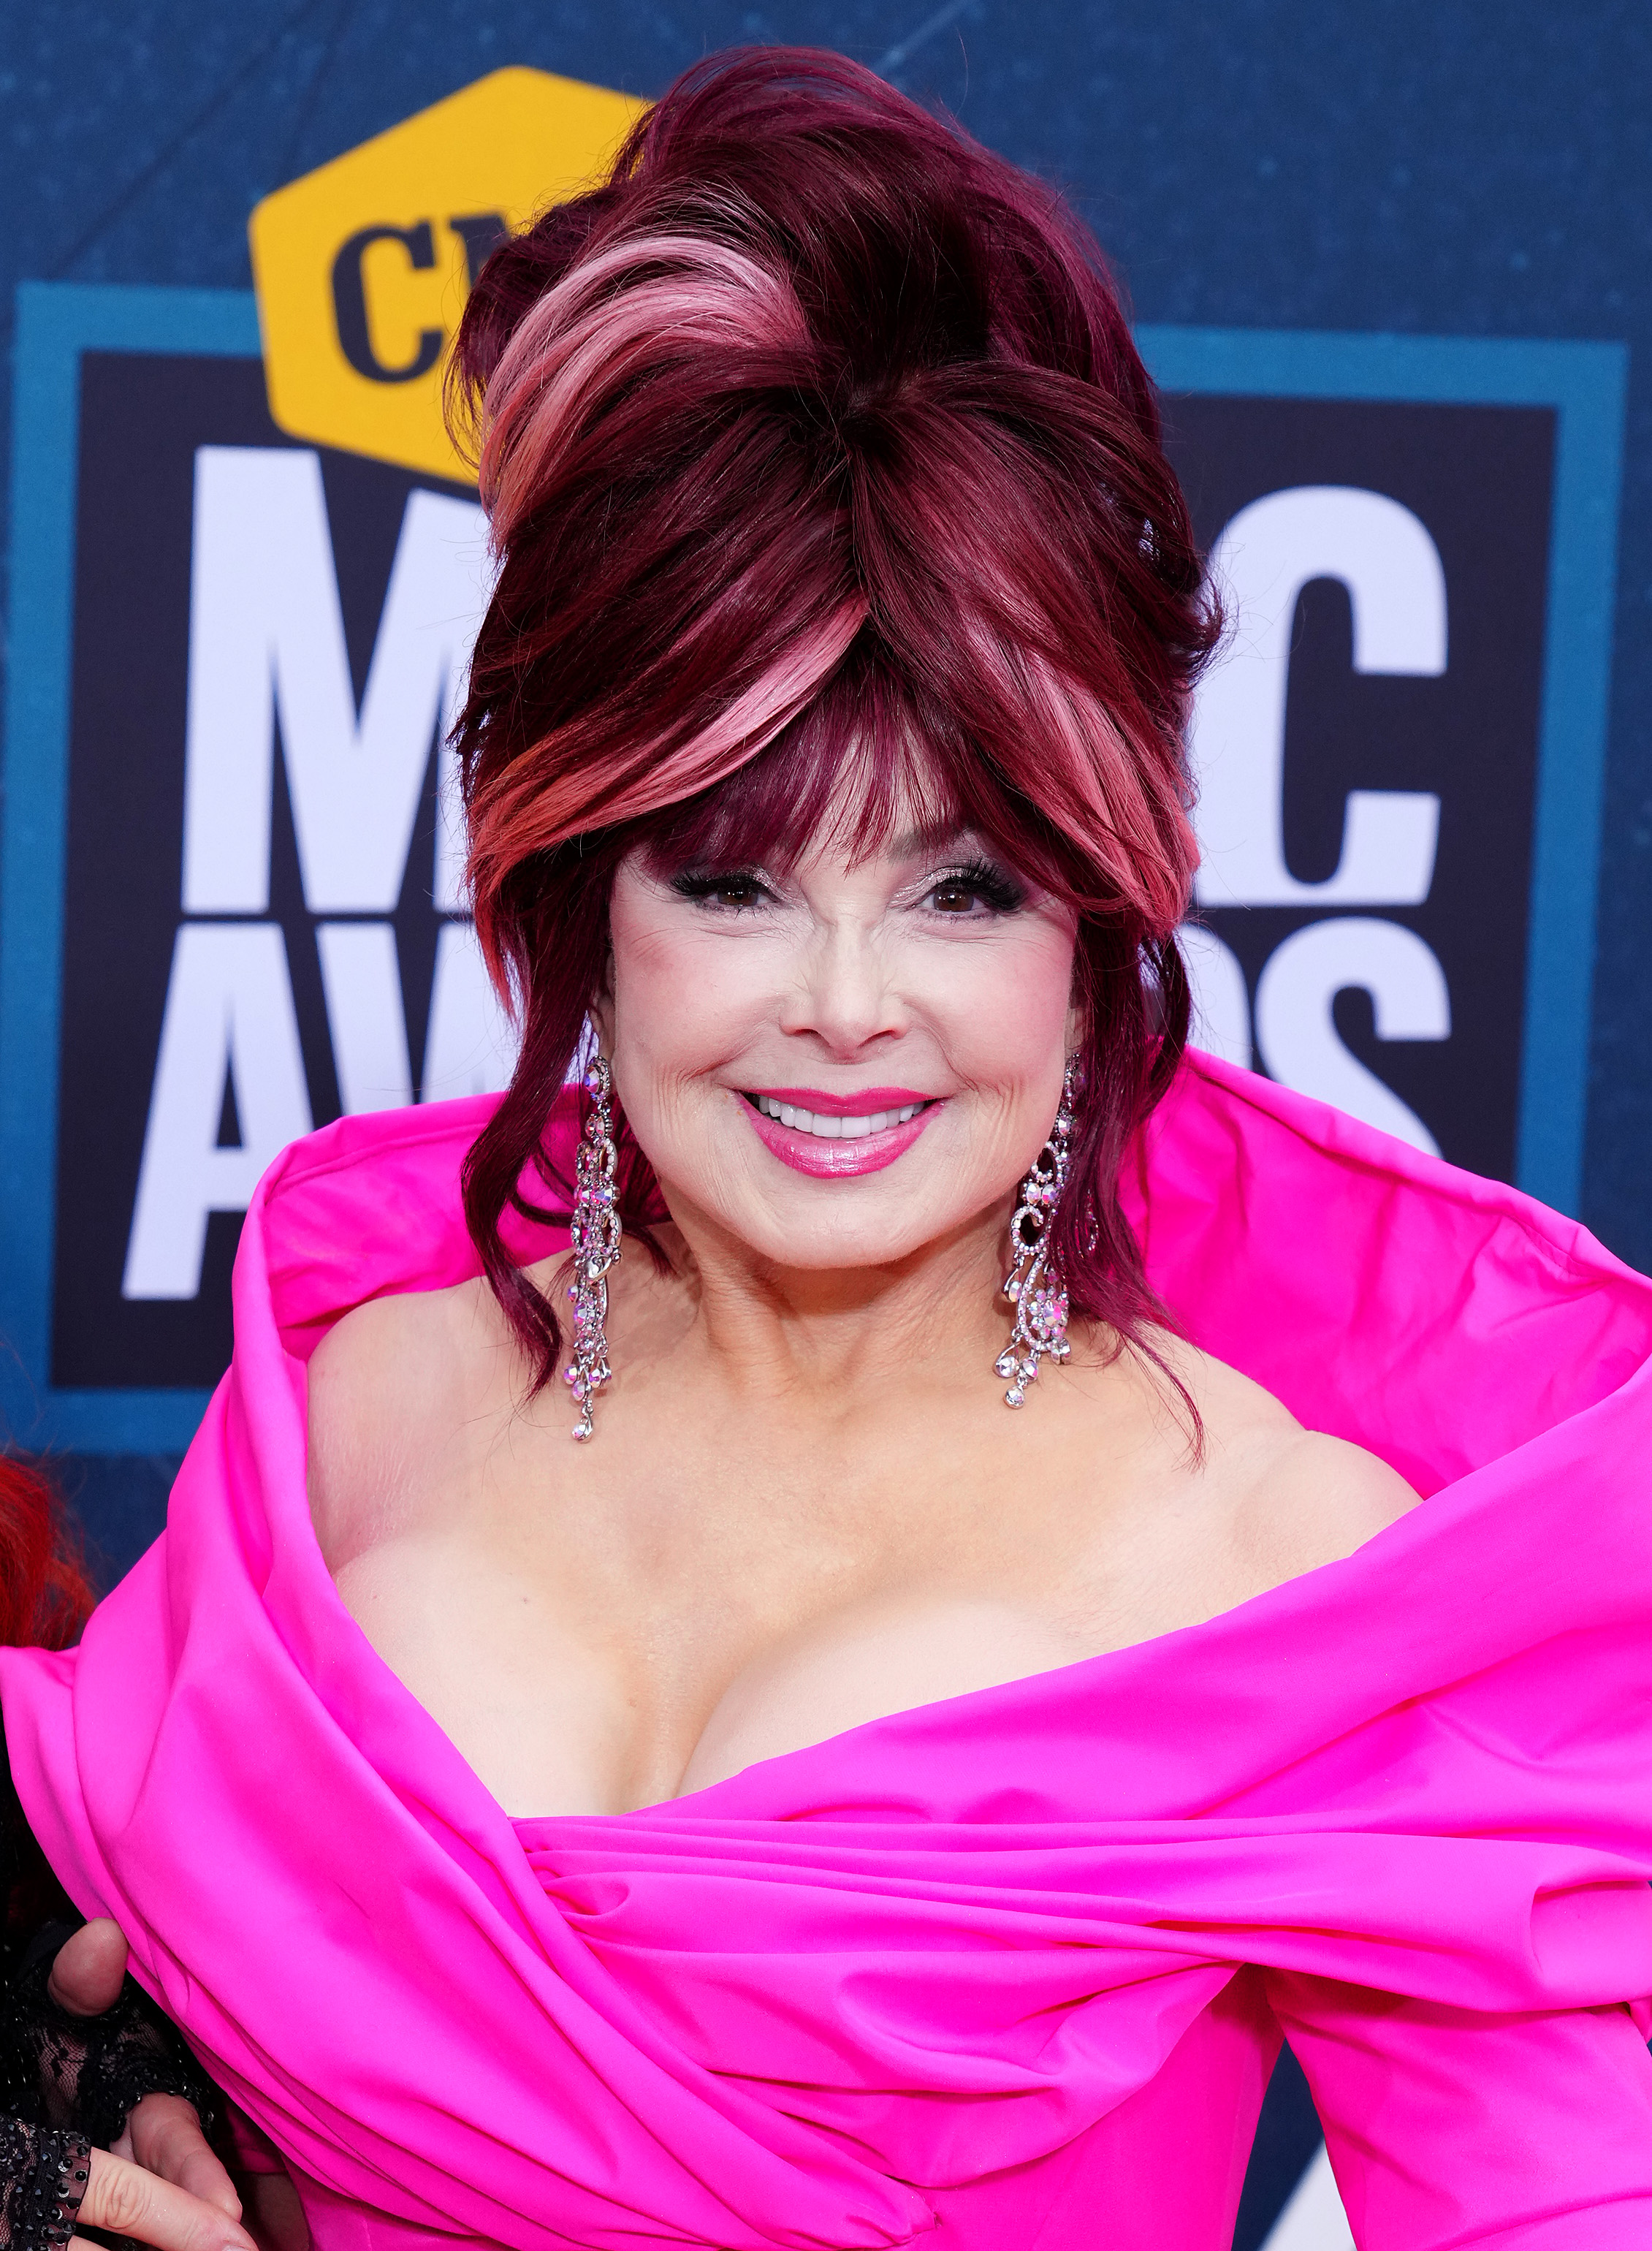 Naomi Judd at the CMT Music Awards in Nashville, Tennessee on April 11, 2022 | Source: Getty Images